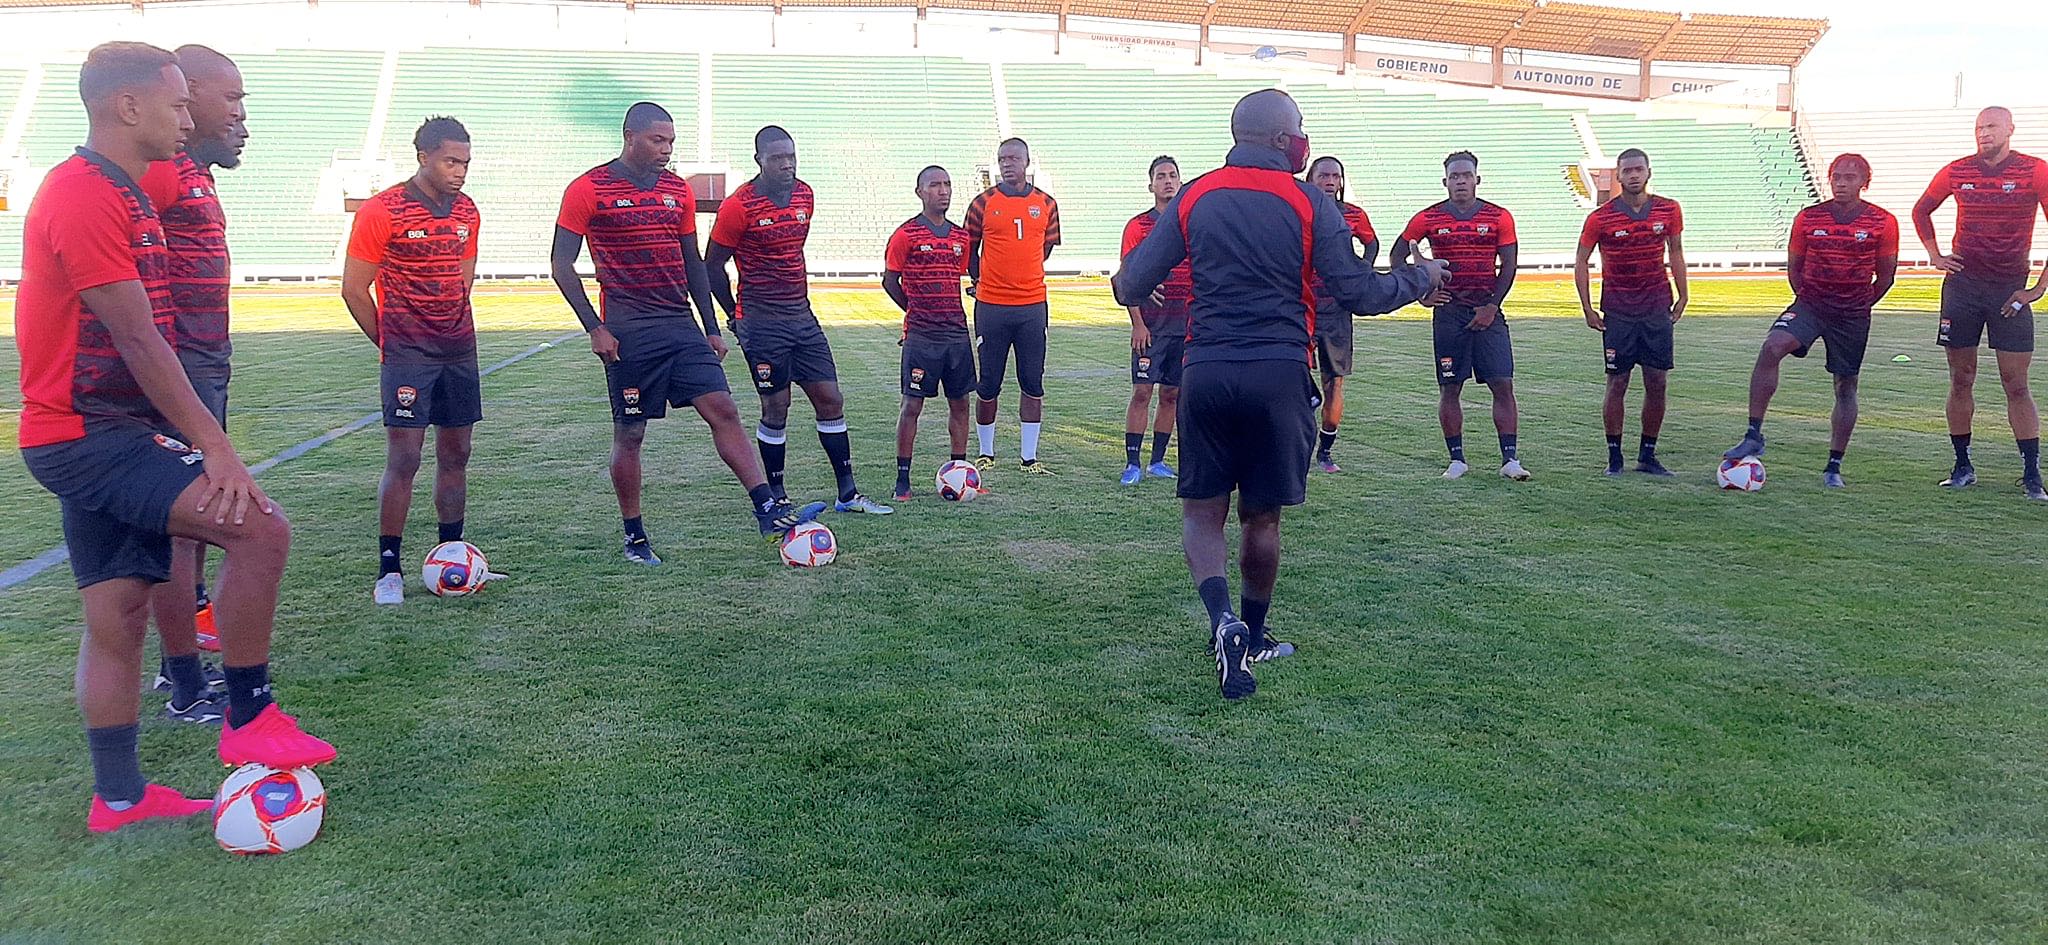 Players from Arsenal, Schalke, Monchengladbach try out for T&T.